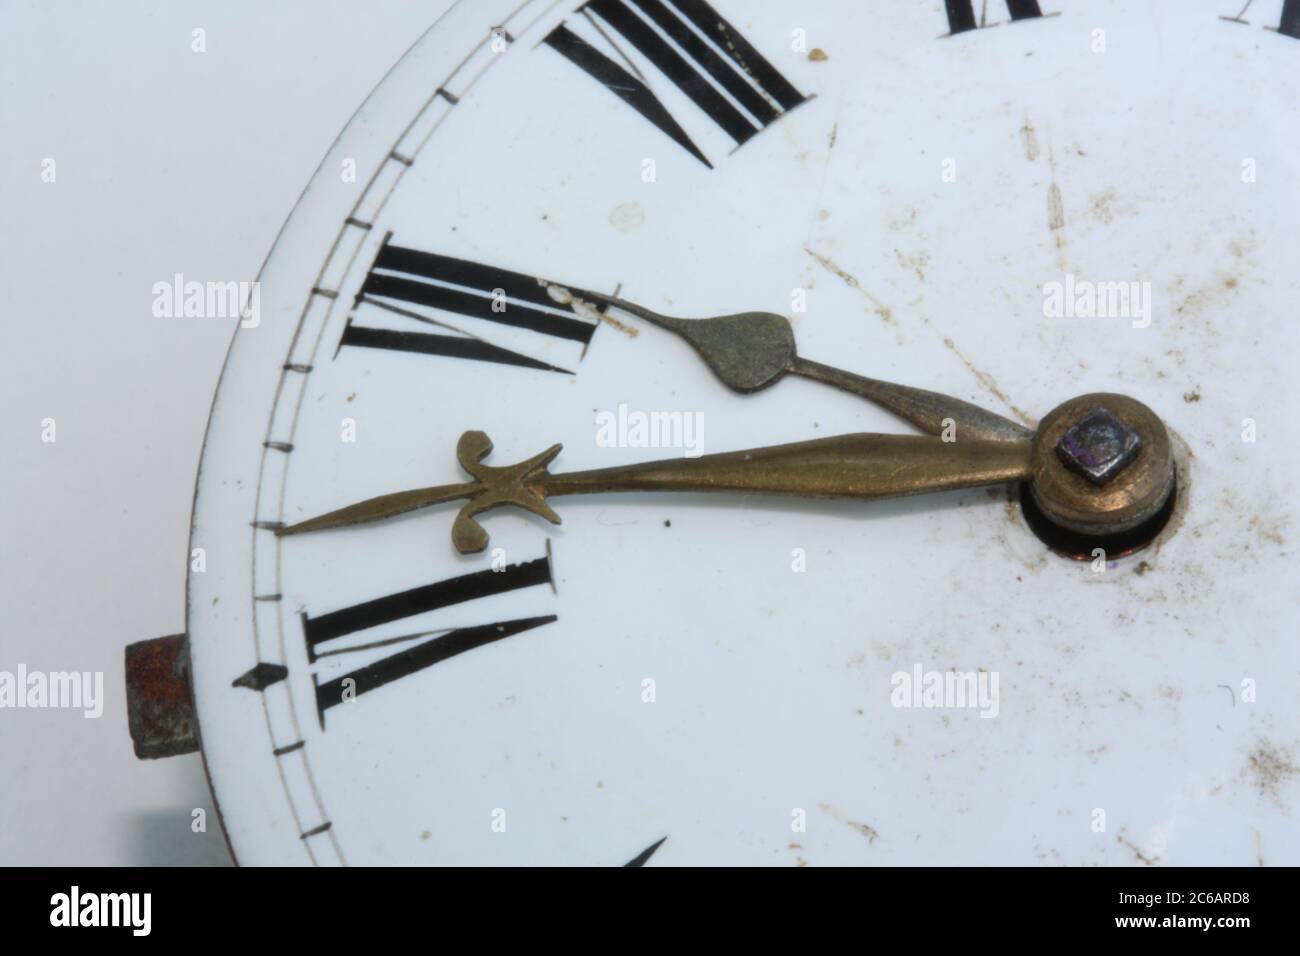 Macro image of a pocket watch face and hands Stock Photo